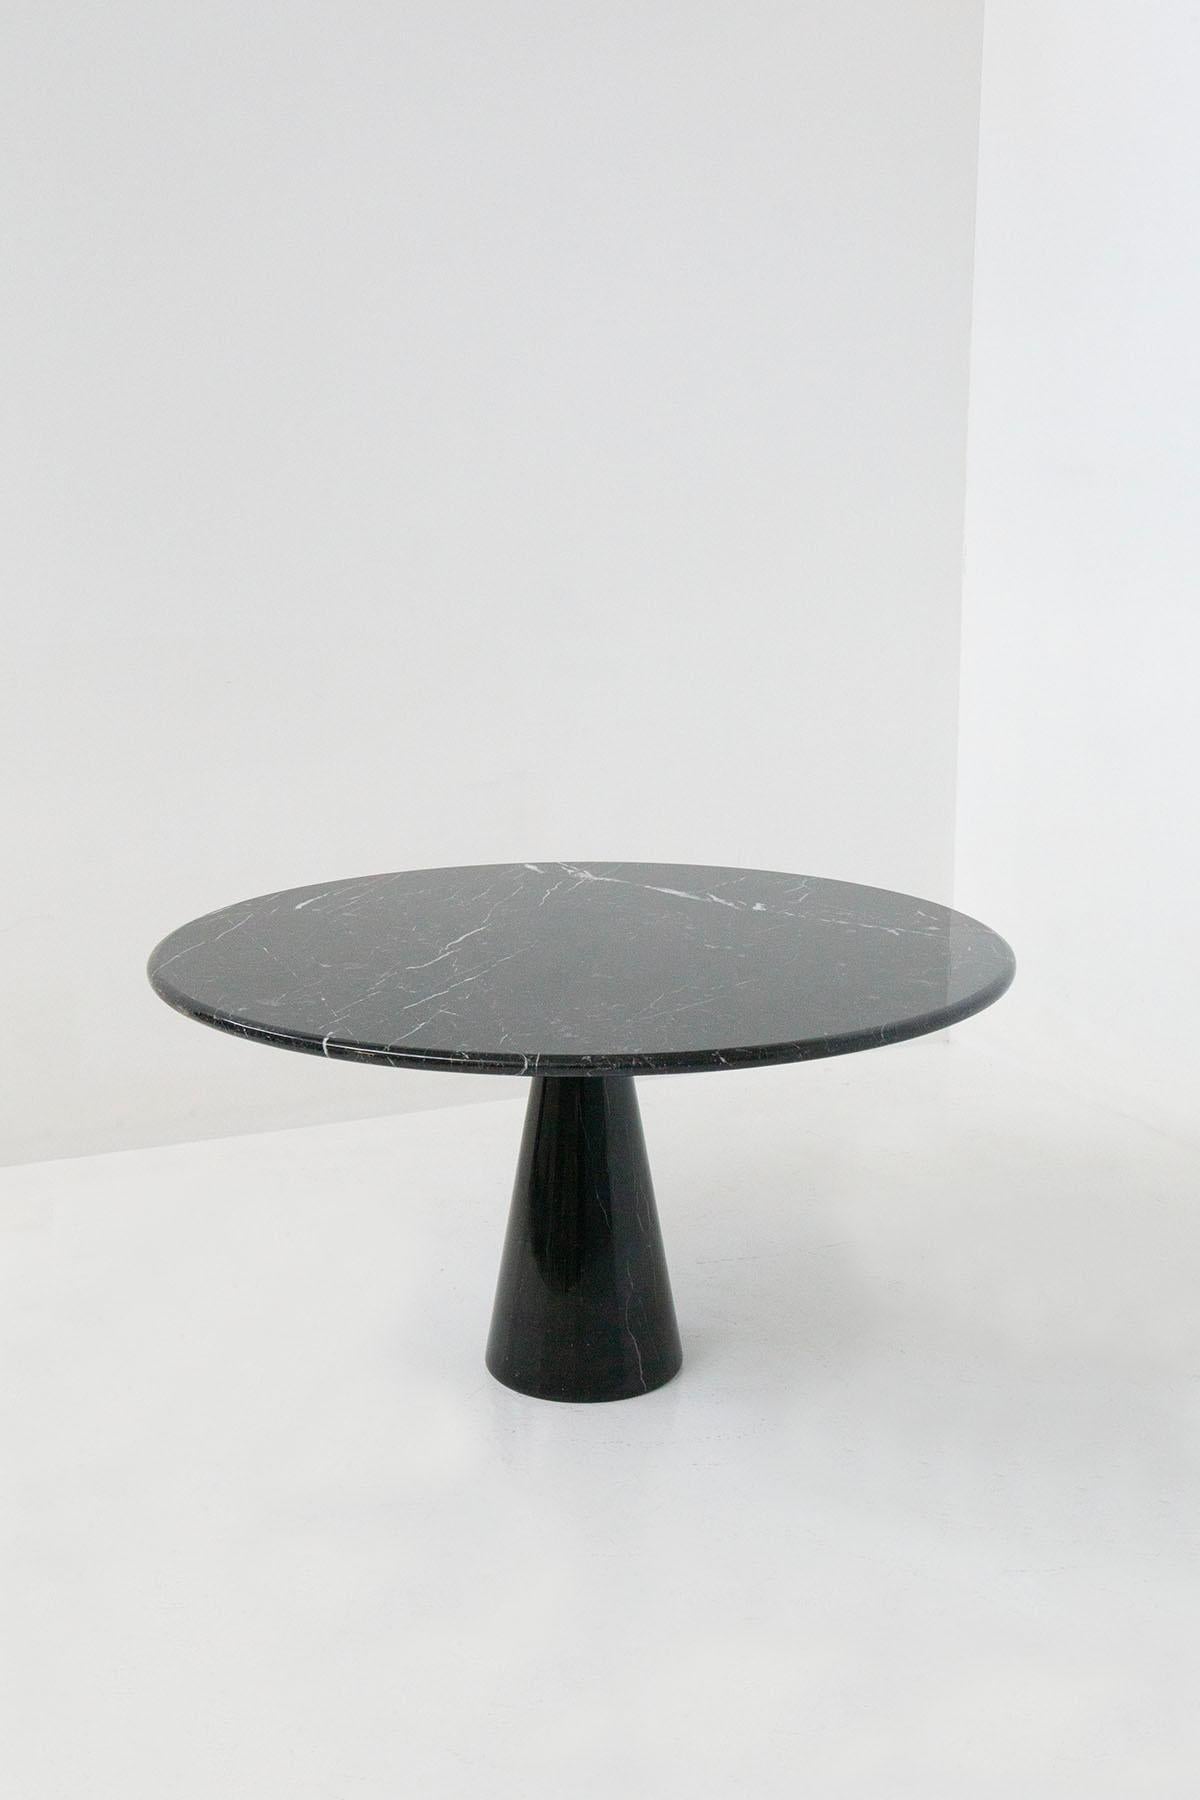 Mid-Century Modern Italian Round Table in Black Marble Design by Angelo Mangiarotti